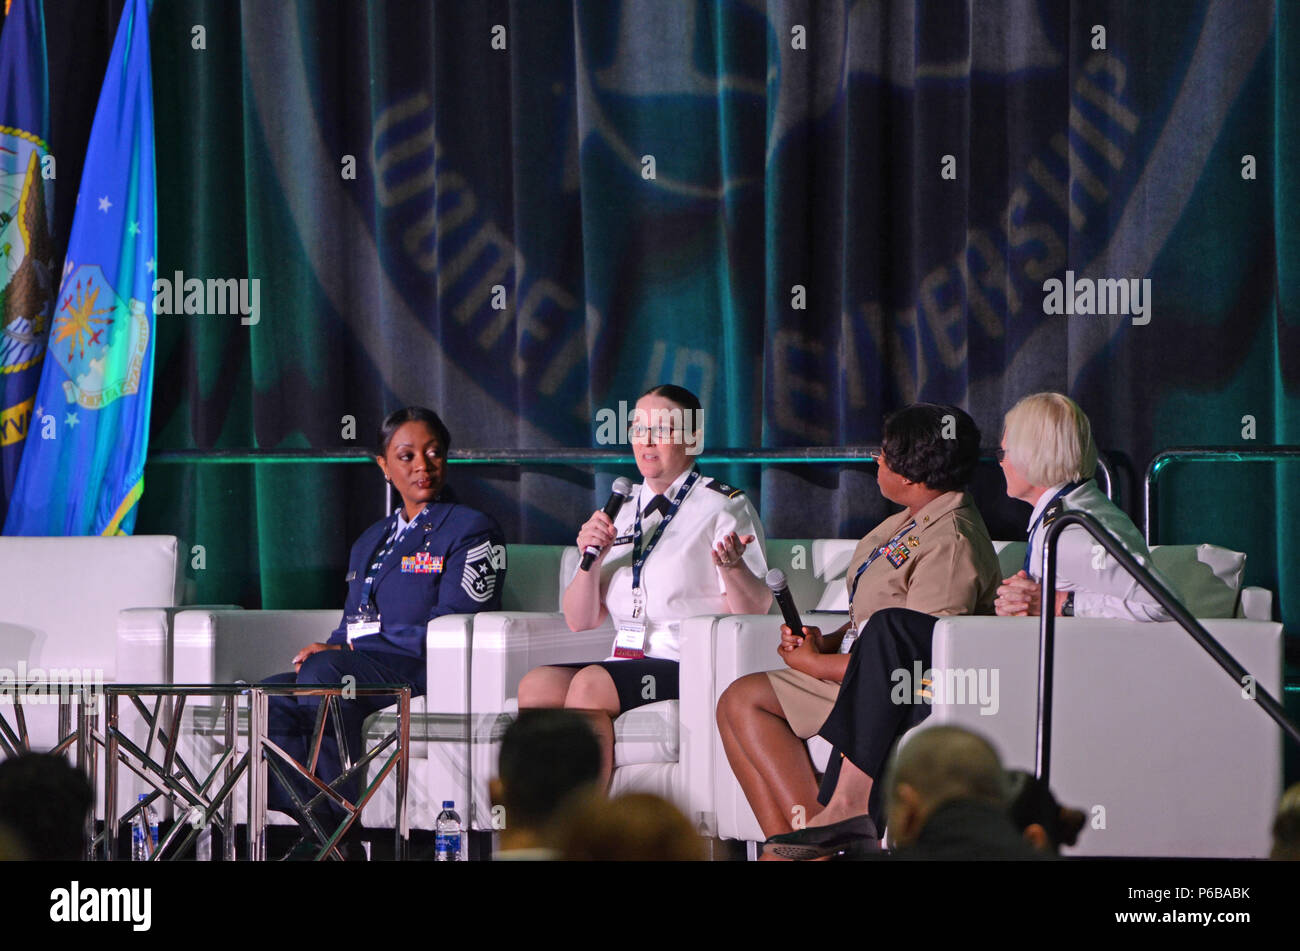 From left: US Air Force Chief Master Sgt. Diena Mosley, Command Chief 30th Space Wing, US Army Lt. Col. Katrina Walters, Deputy Chief of Clinical Services Weed Army Community Hospital, US Navy Cmdr. Elizabeth Reeves, Preventive Medicine Officer, 1 Marine Expeditionary Force, US Army Brig. Gen. Jill K Faris, Assistant Surgeon General for Mobilization, Readiness and National Guard Affairs sat on the women's health panel to discuss their expert practices in preventive, acute, and chronic healthcare for military women during the Joint Women Leadership Symposium June 20. Stock Photo